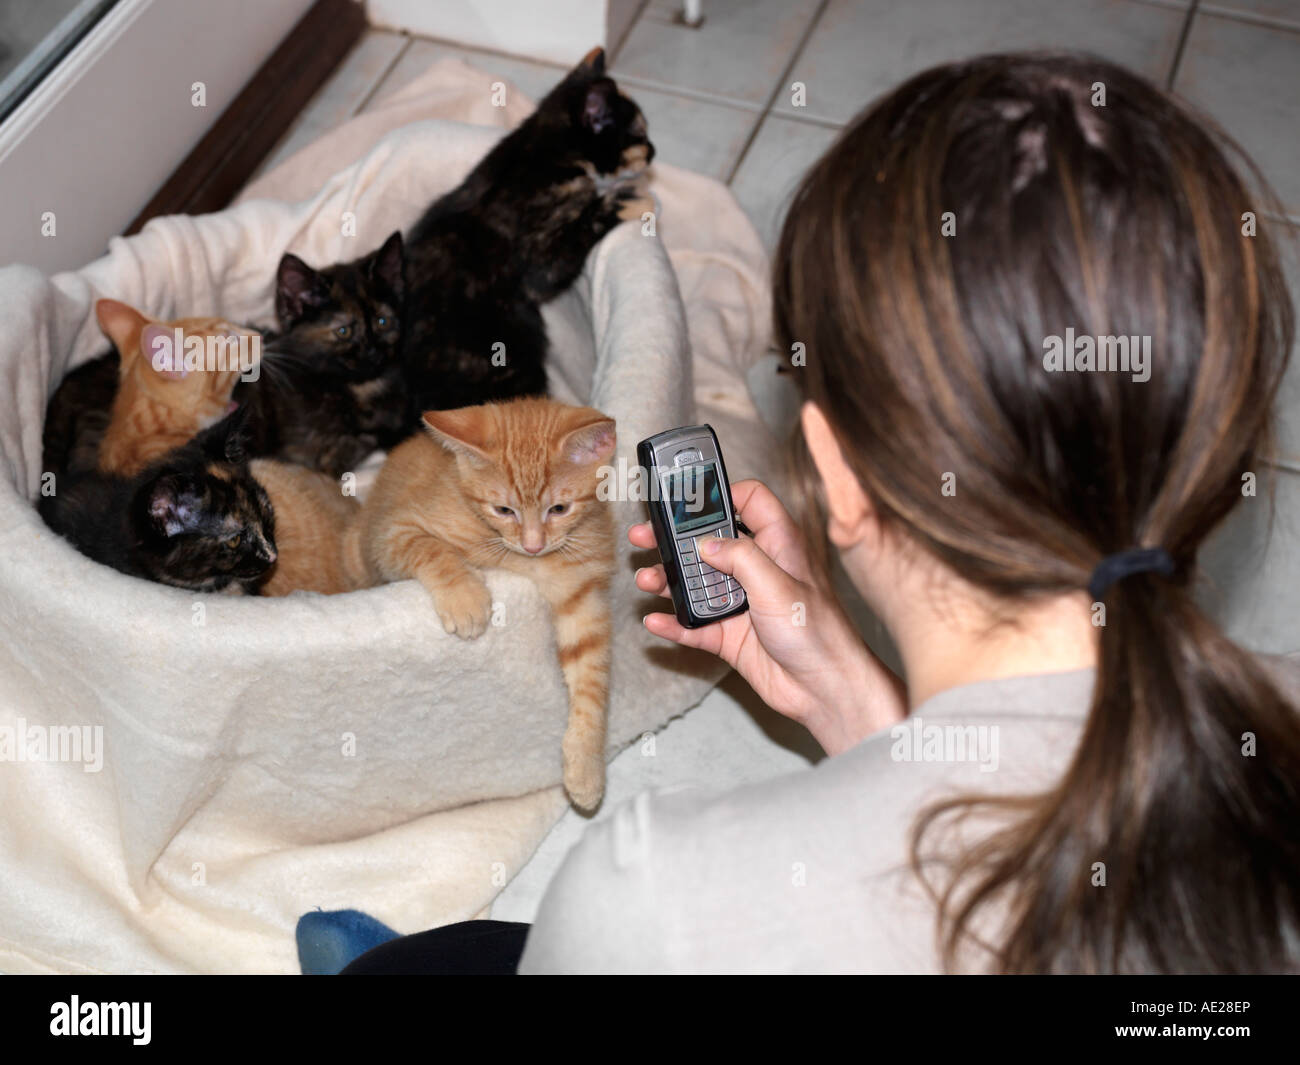 Teenage Girl Taking Photograph with Camera Phone of Five Kittens Stock Photo